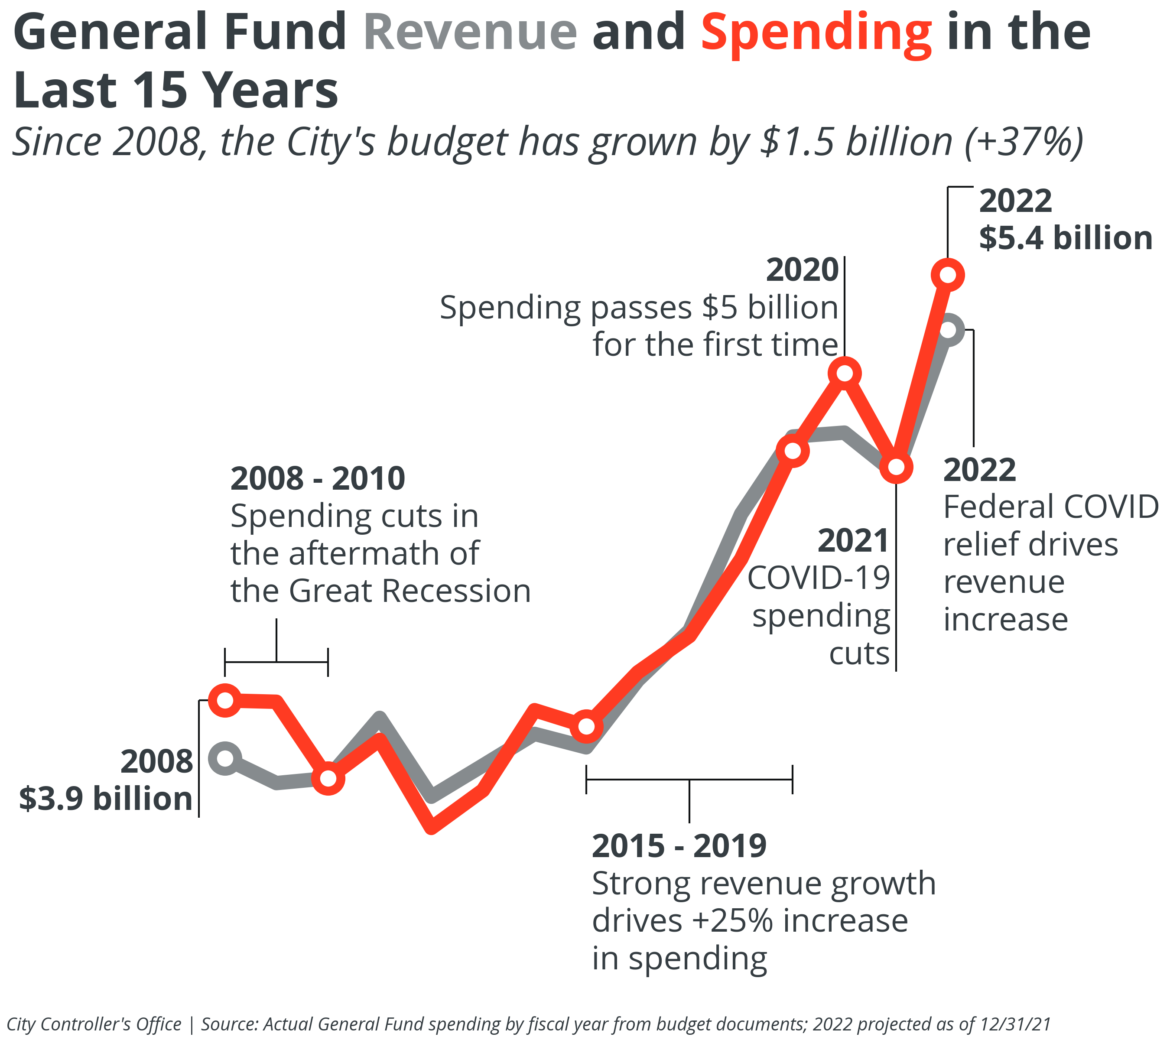 General Fund Revenue and Spending in the Last 15 Years